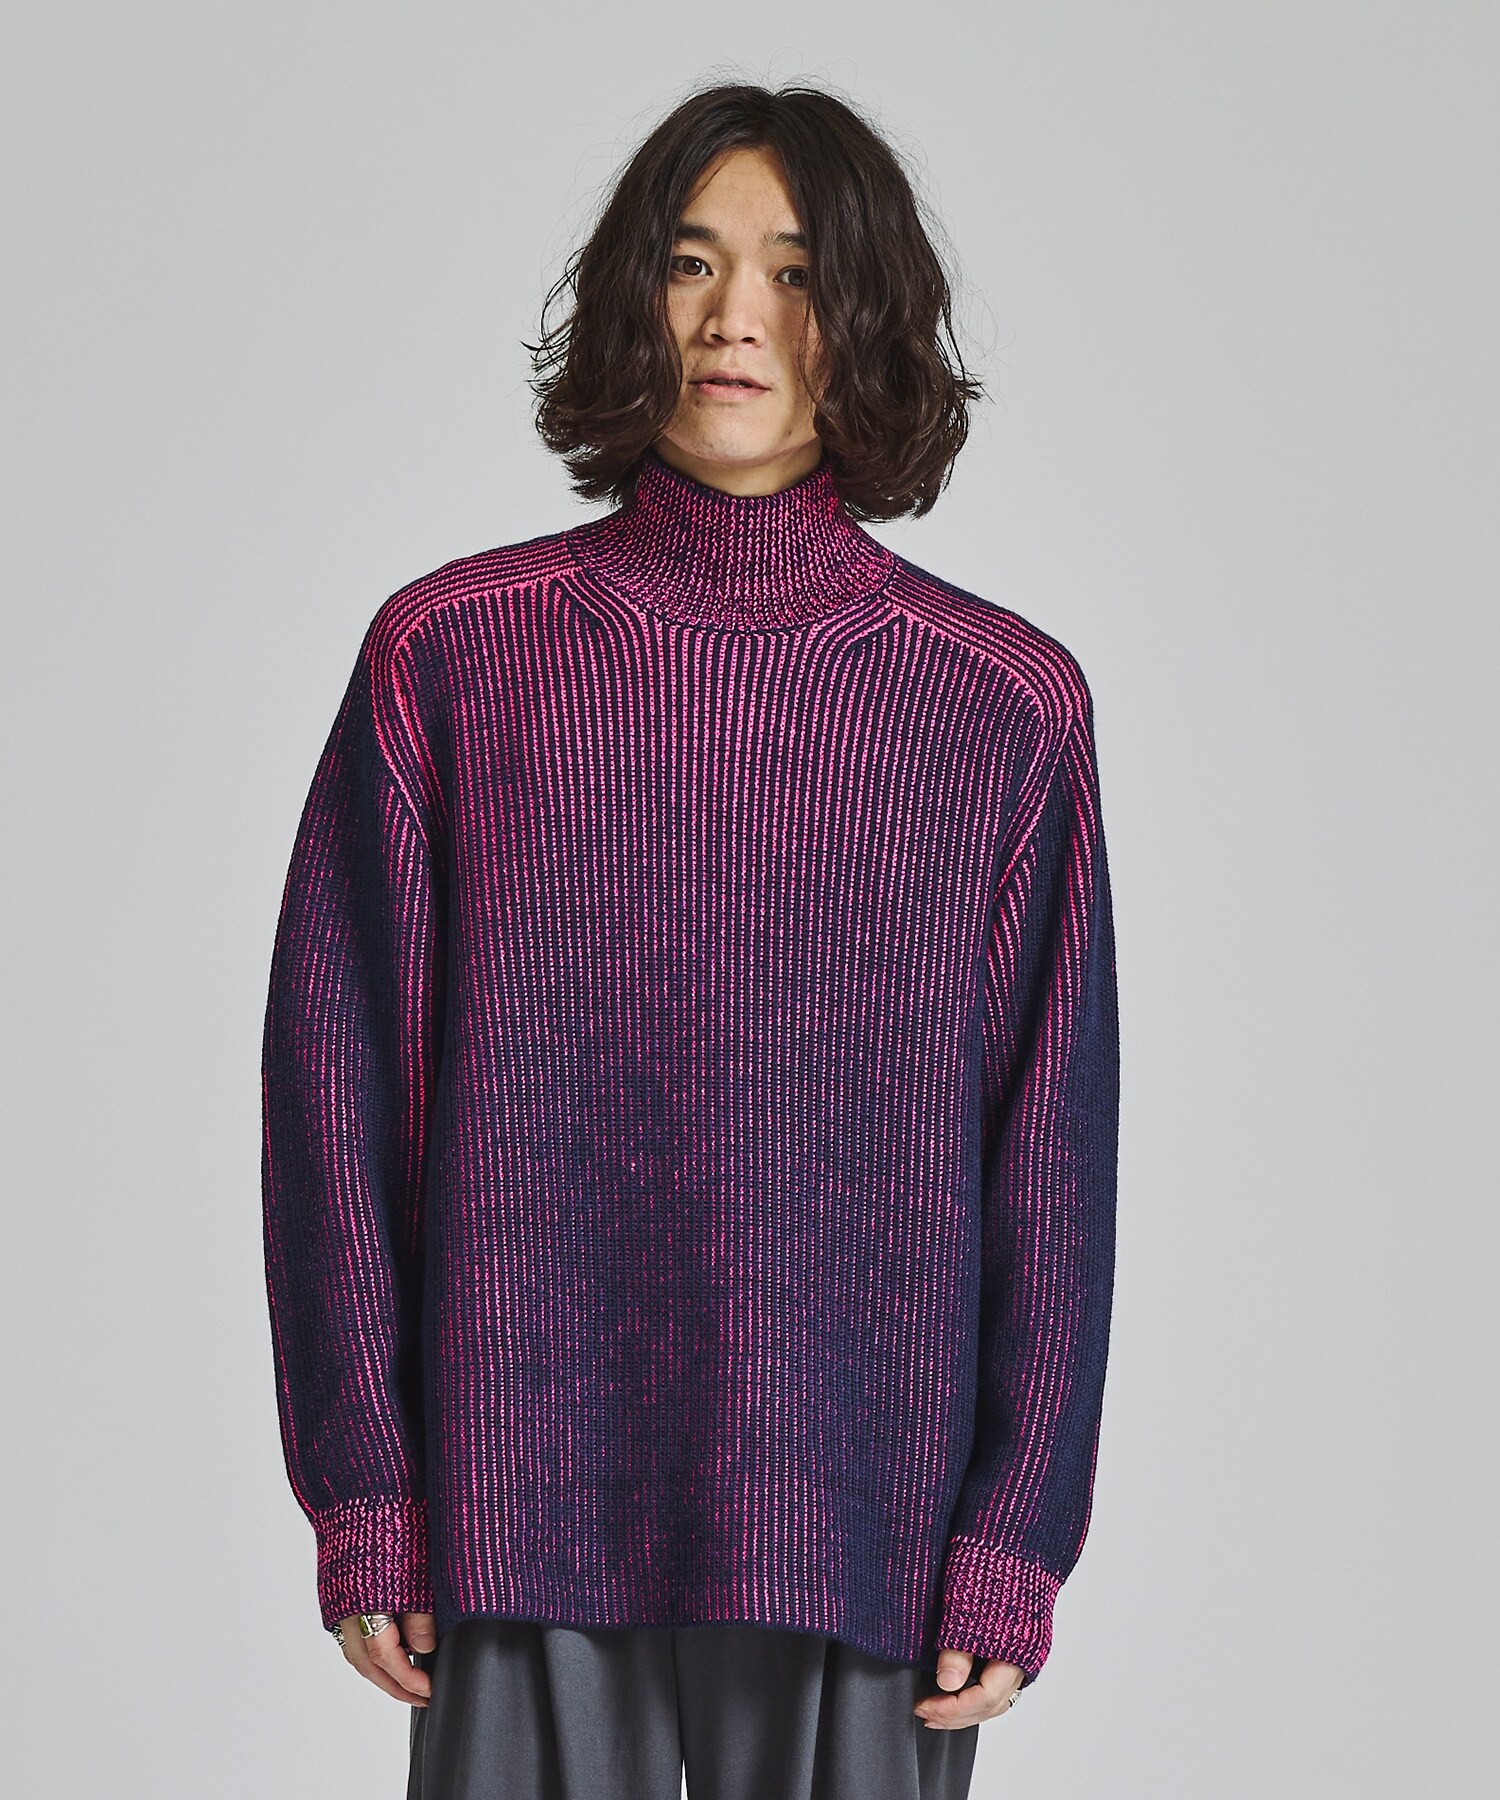 Ambient ribbed knit